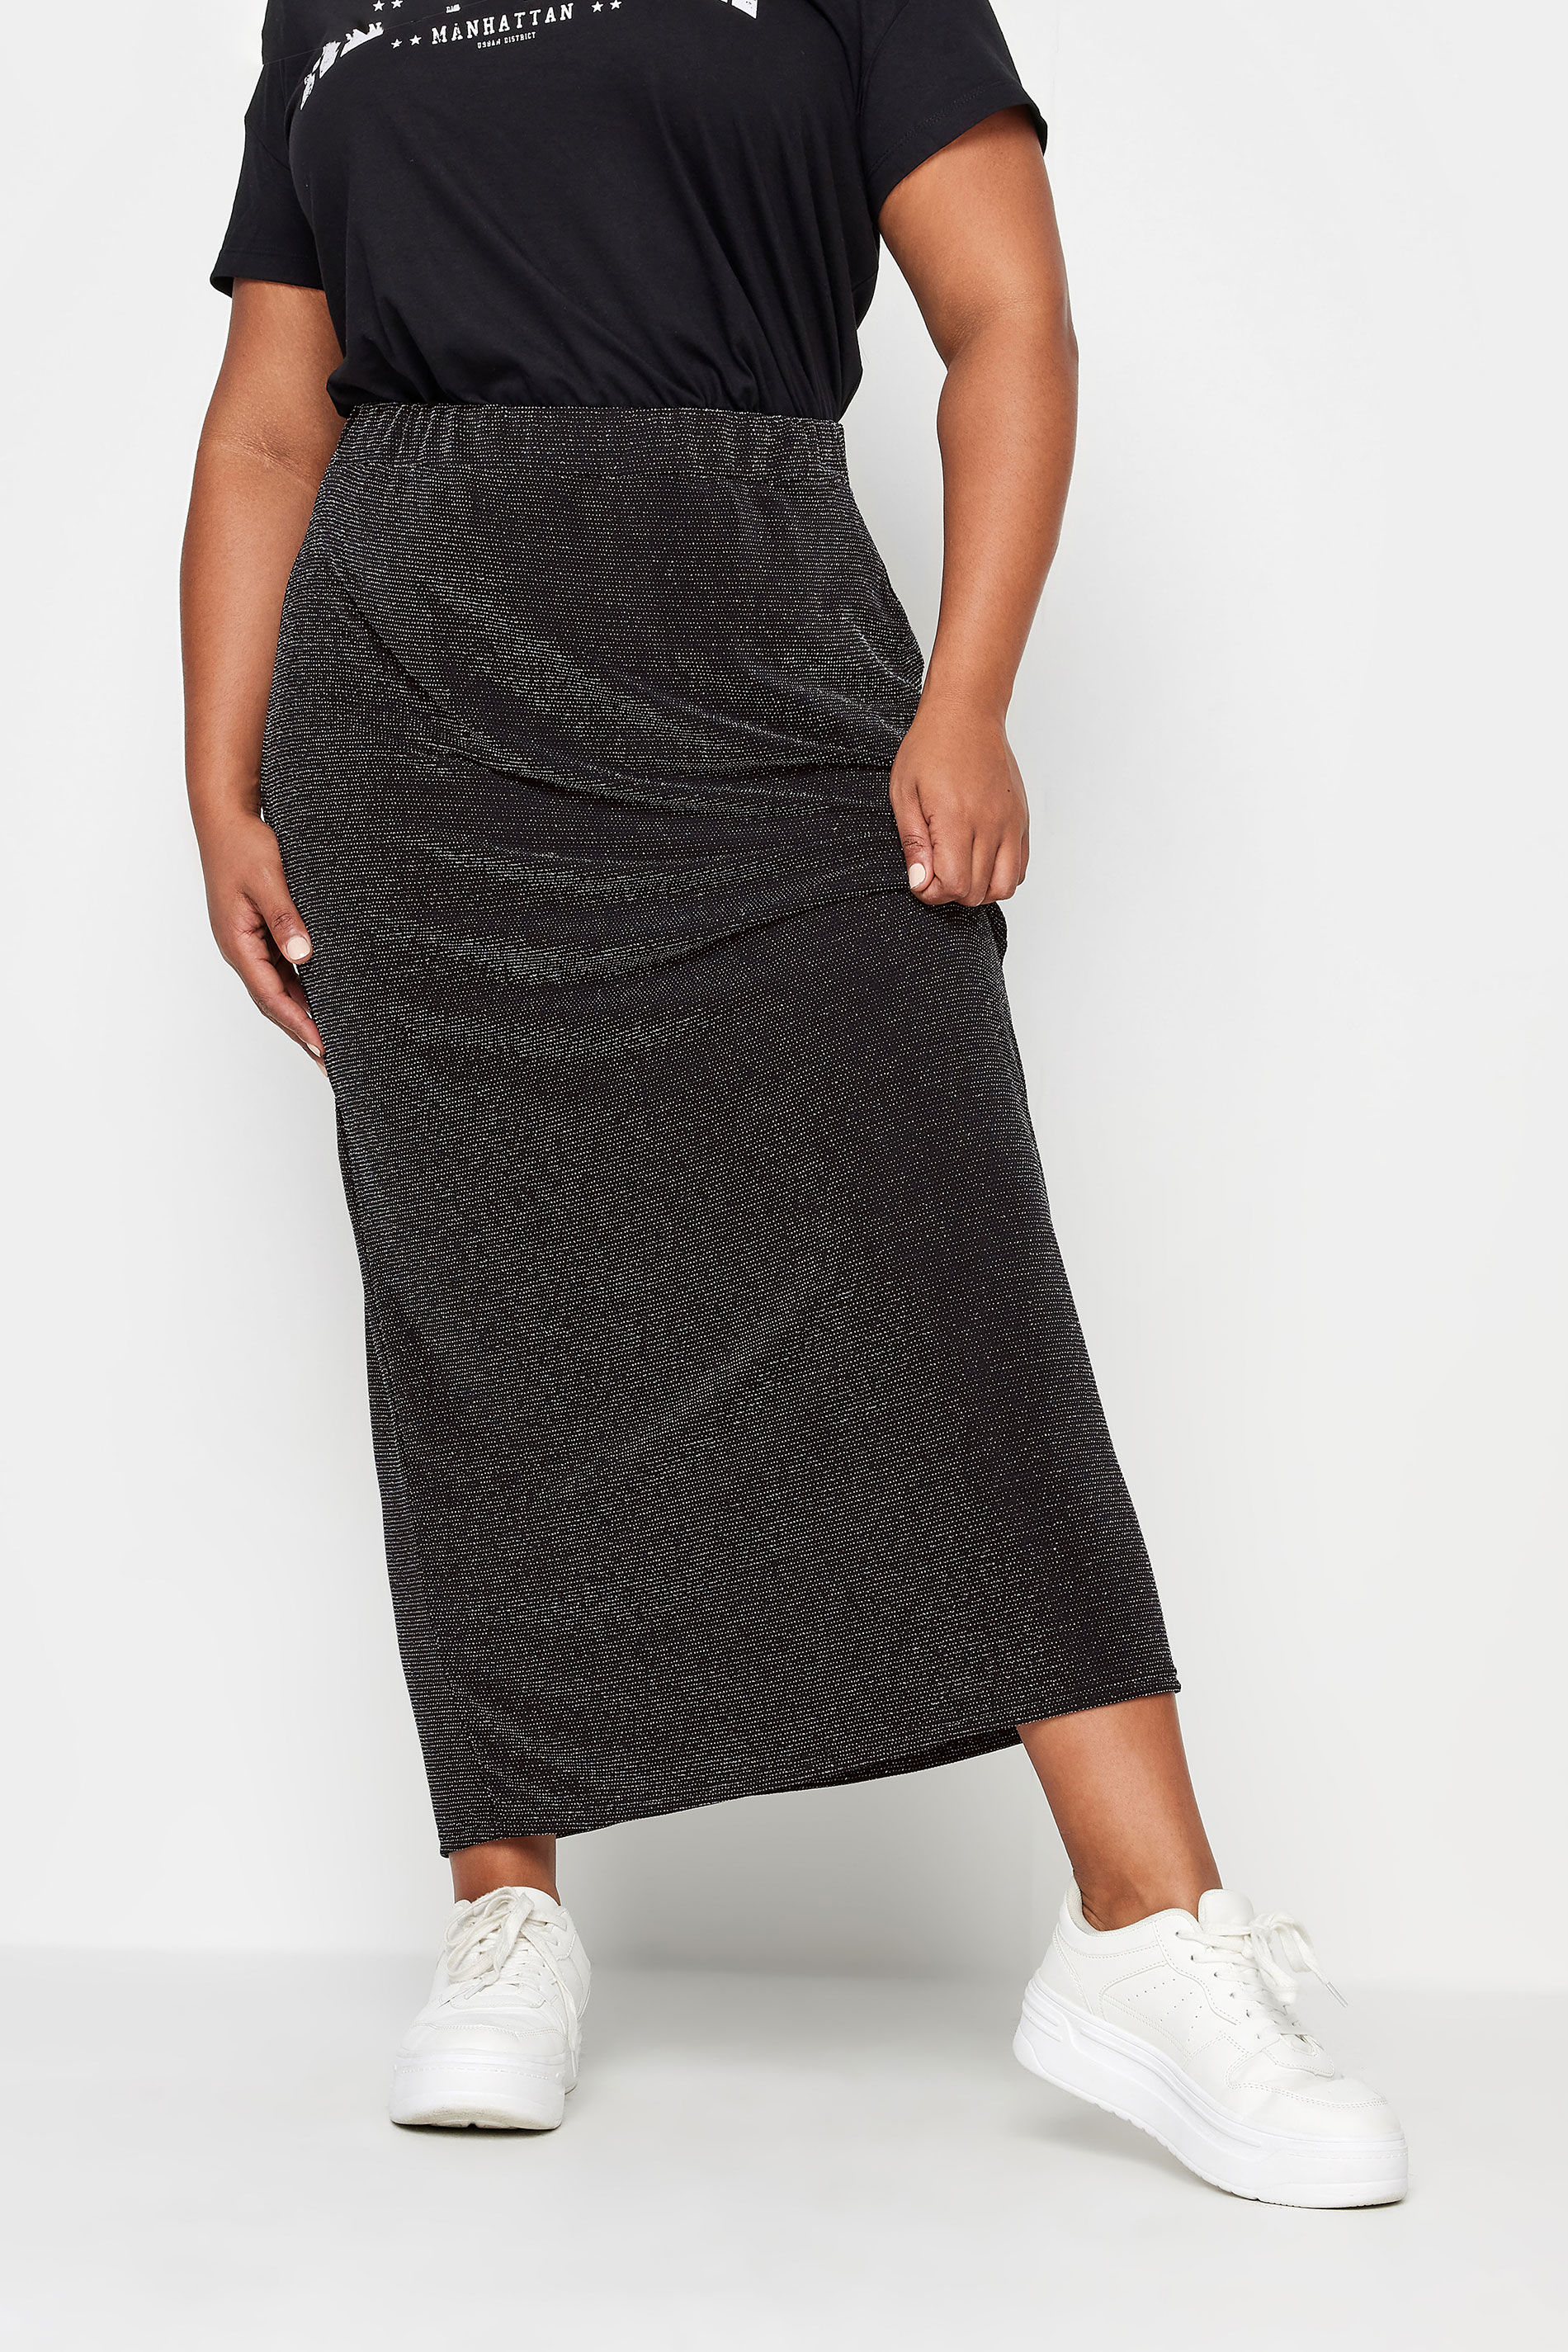 YOURS Plus Size Black Glitter Maxi Skirt | Yours Clothing 1